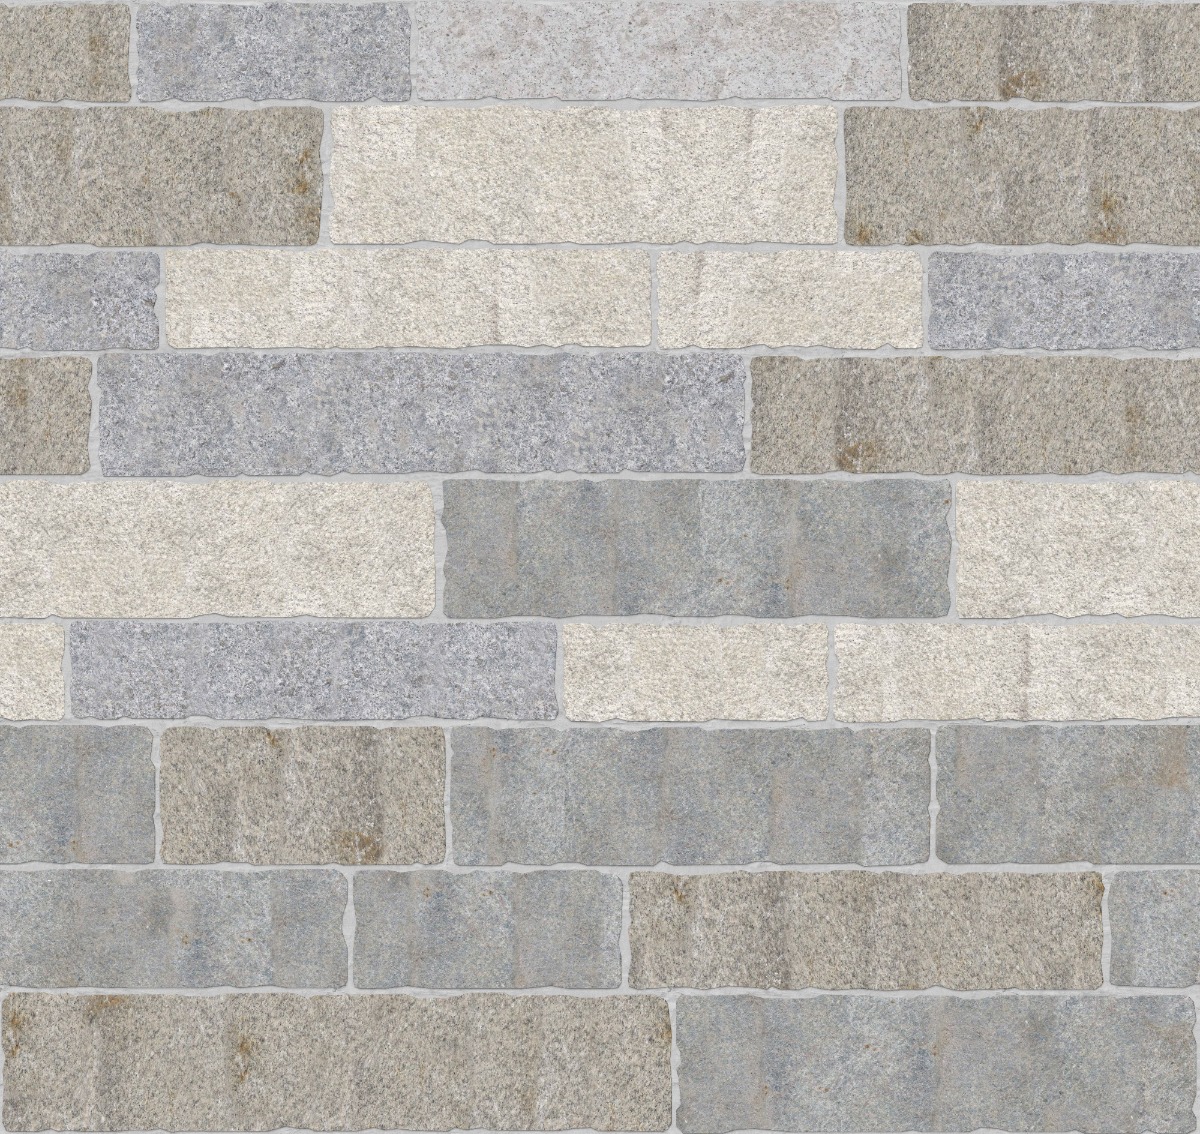 A seamless stone texture with granite - reclaimed footworn planks - cool color mix - weathered & worn surface - m269 blocks arranged in a Rough-Edge Planks (random lengths & widths - rough edges) - DP046 pattern